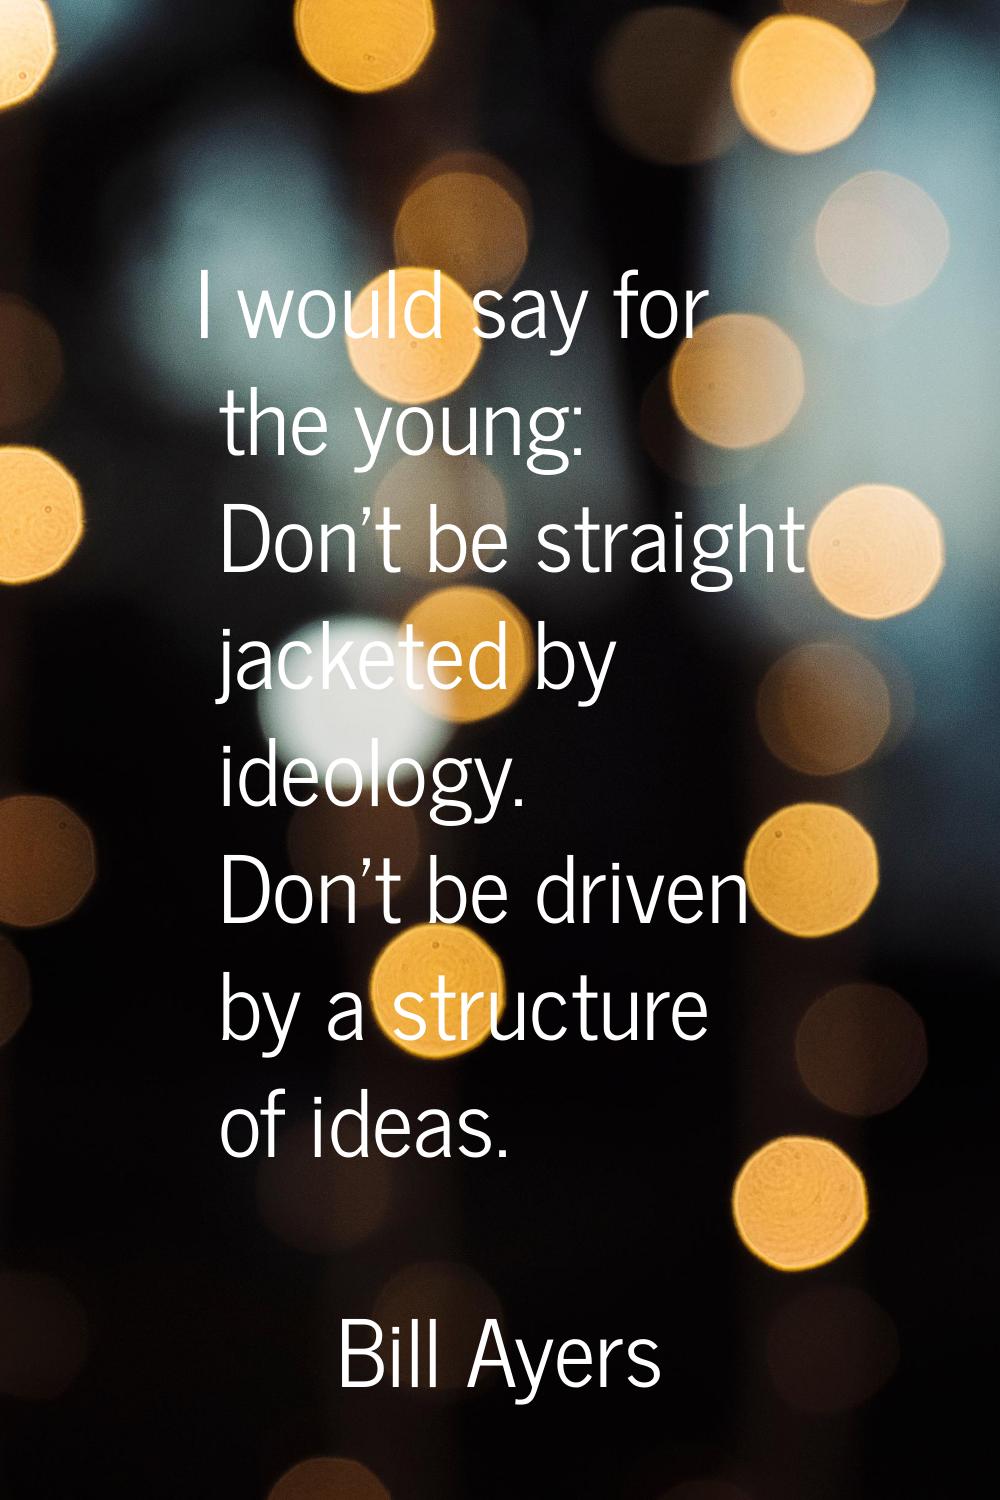 I would say for the young: Don't be straight jacketed by ideology. Don't be driven by a structure o